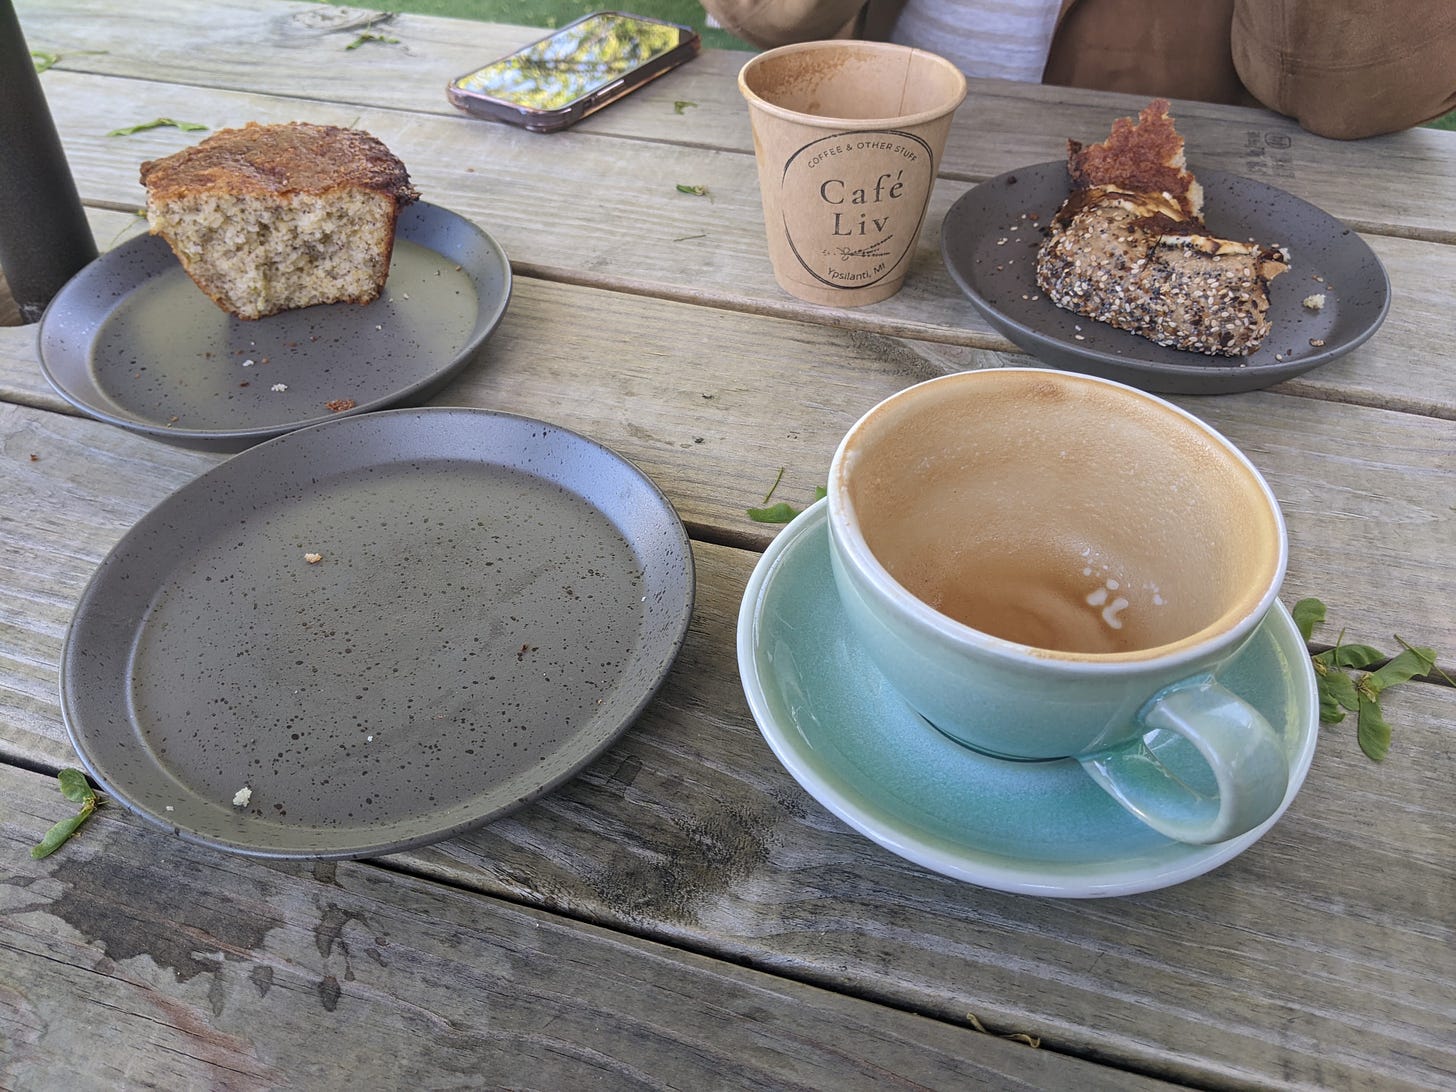 A set of empty plates and coffee mugs on a table